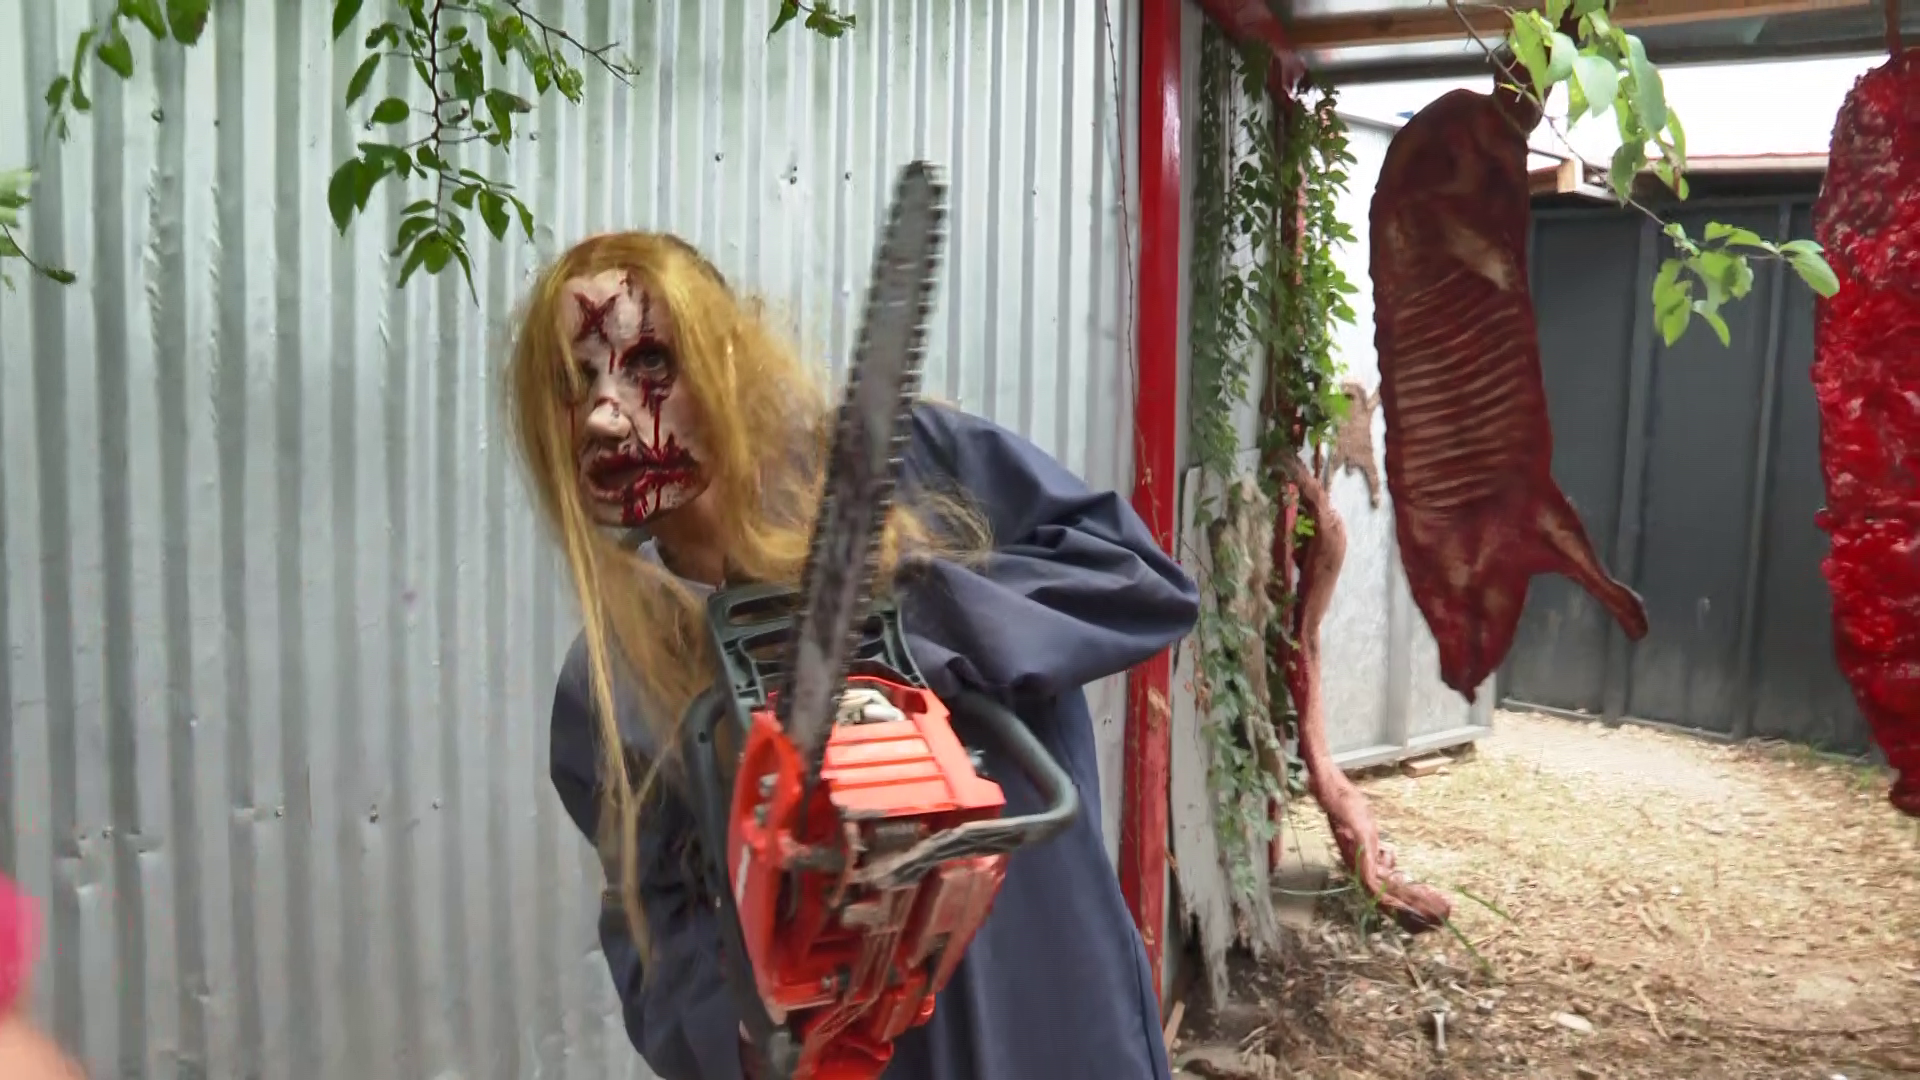 Morning anchor Heidi Alagha is becoming a character at the Silo of Screams Haunted House.